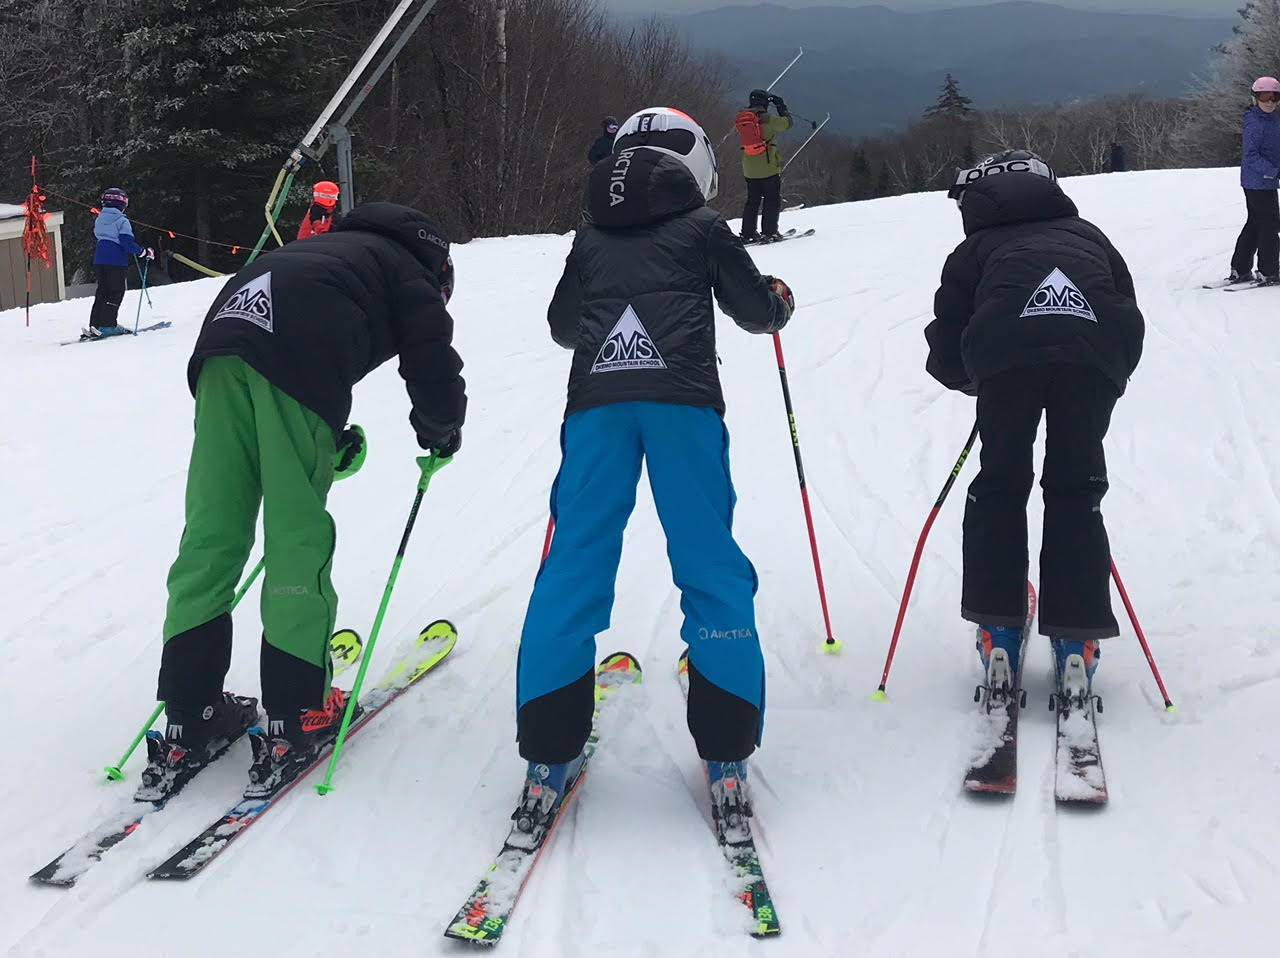 Okemo Mountain School is a great place to make lifetime friends.